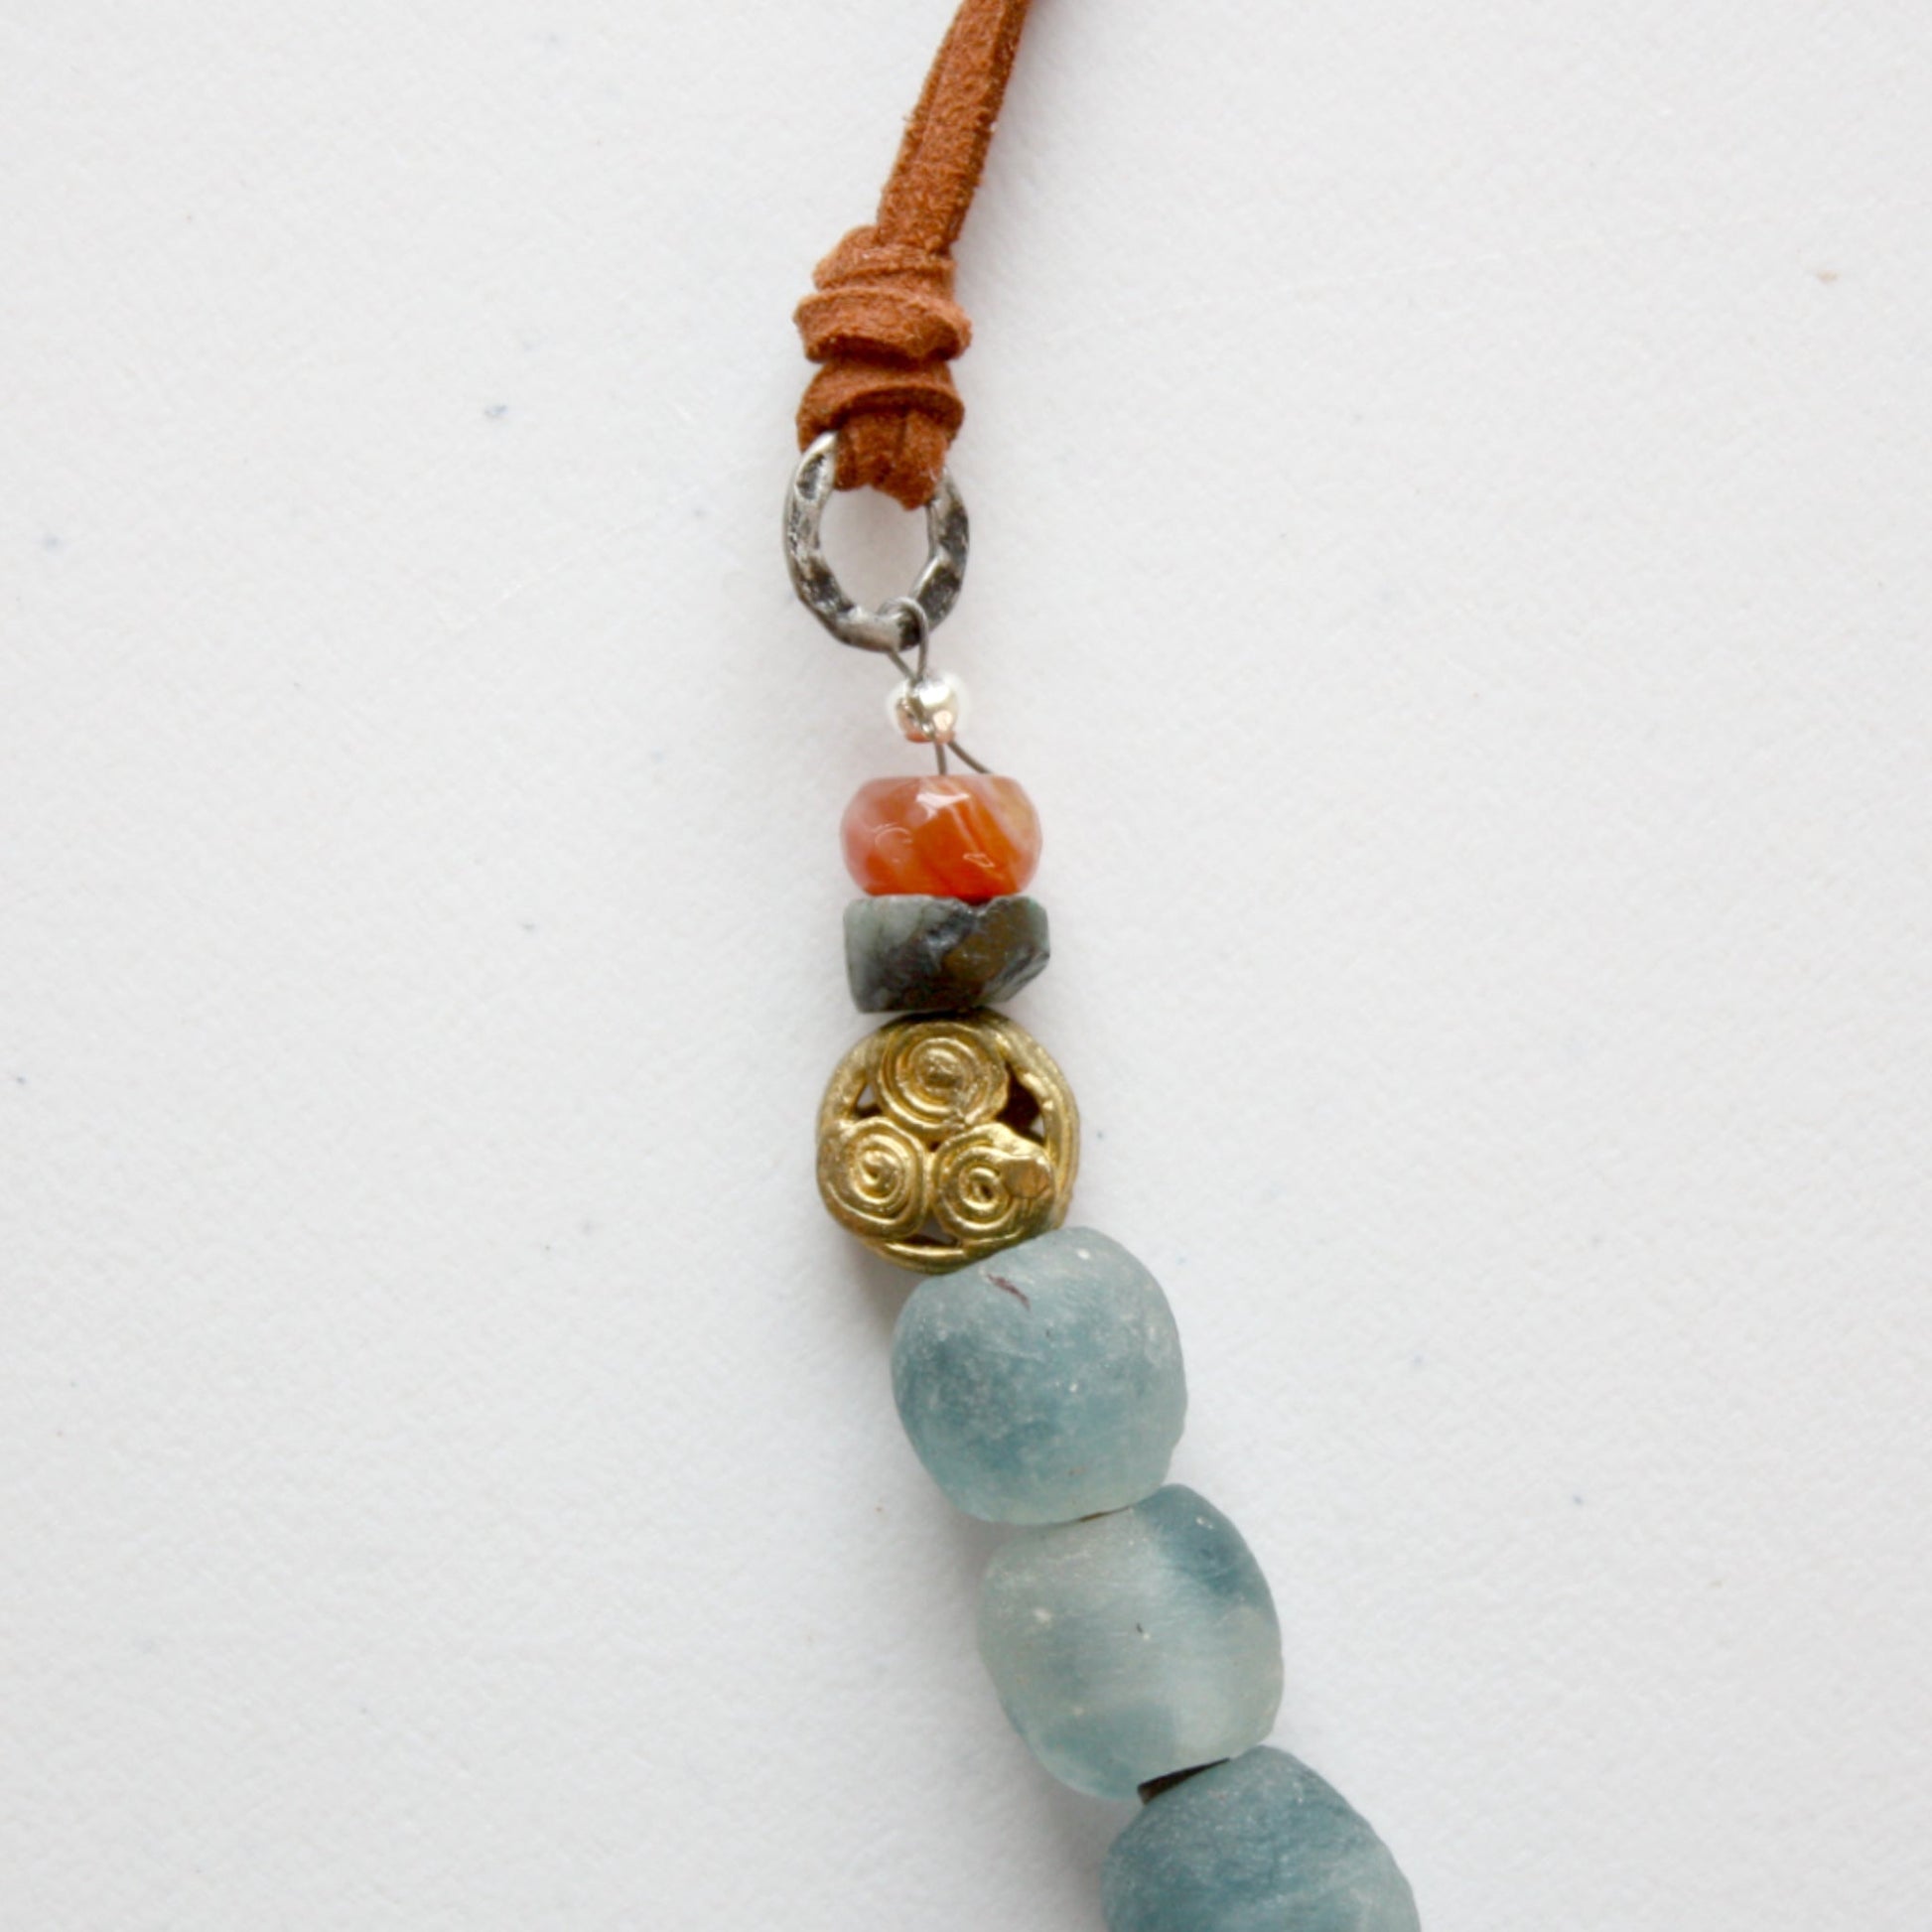 Beachy Turquoise Boho Necklace - Made in the USA